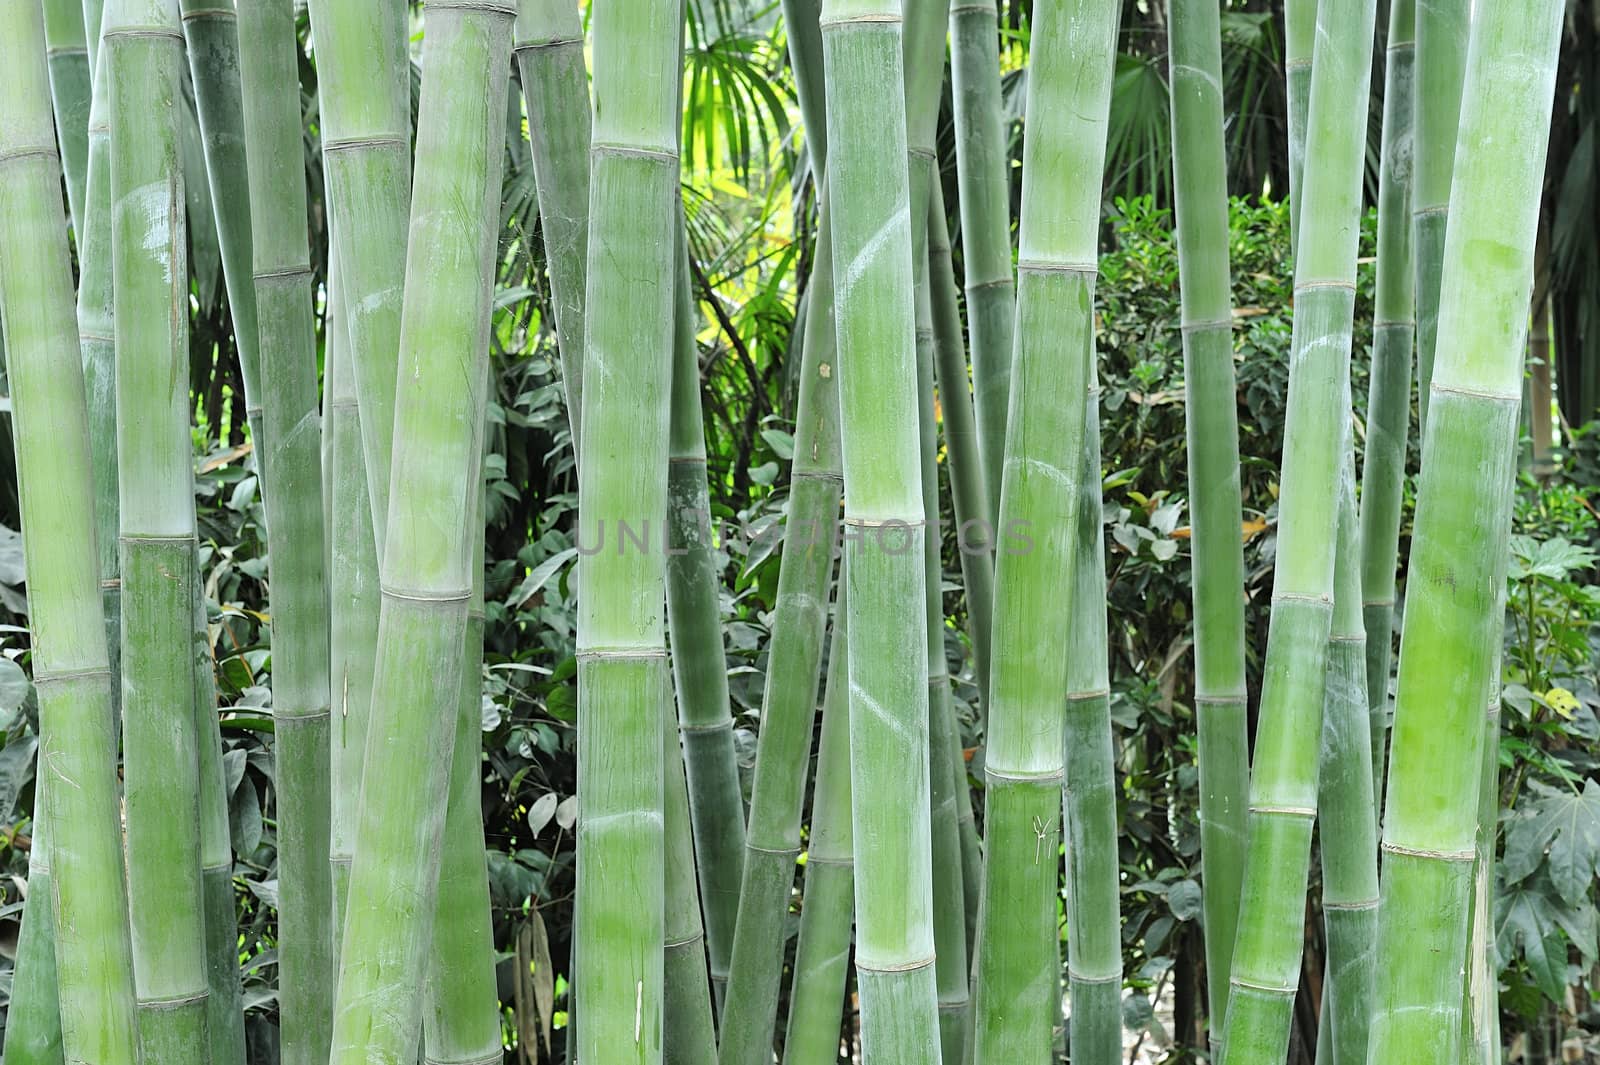 the bamboo groves